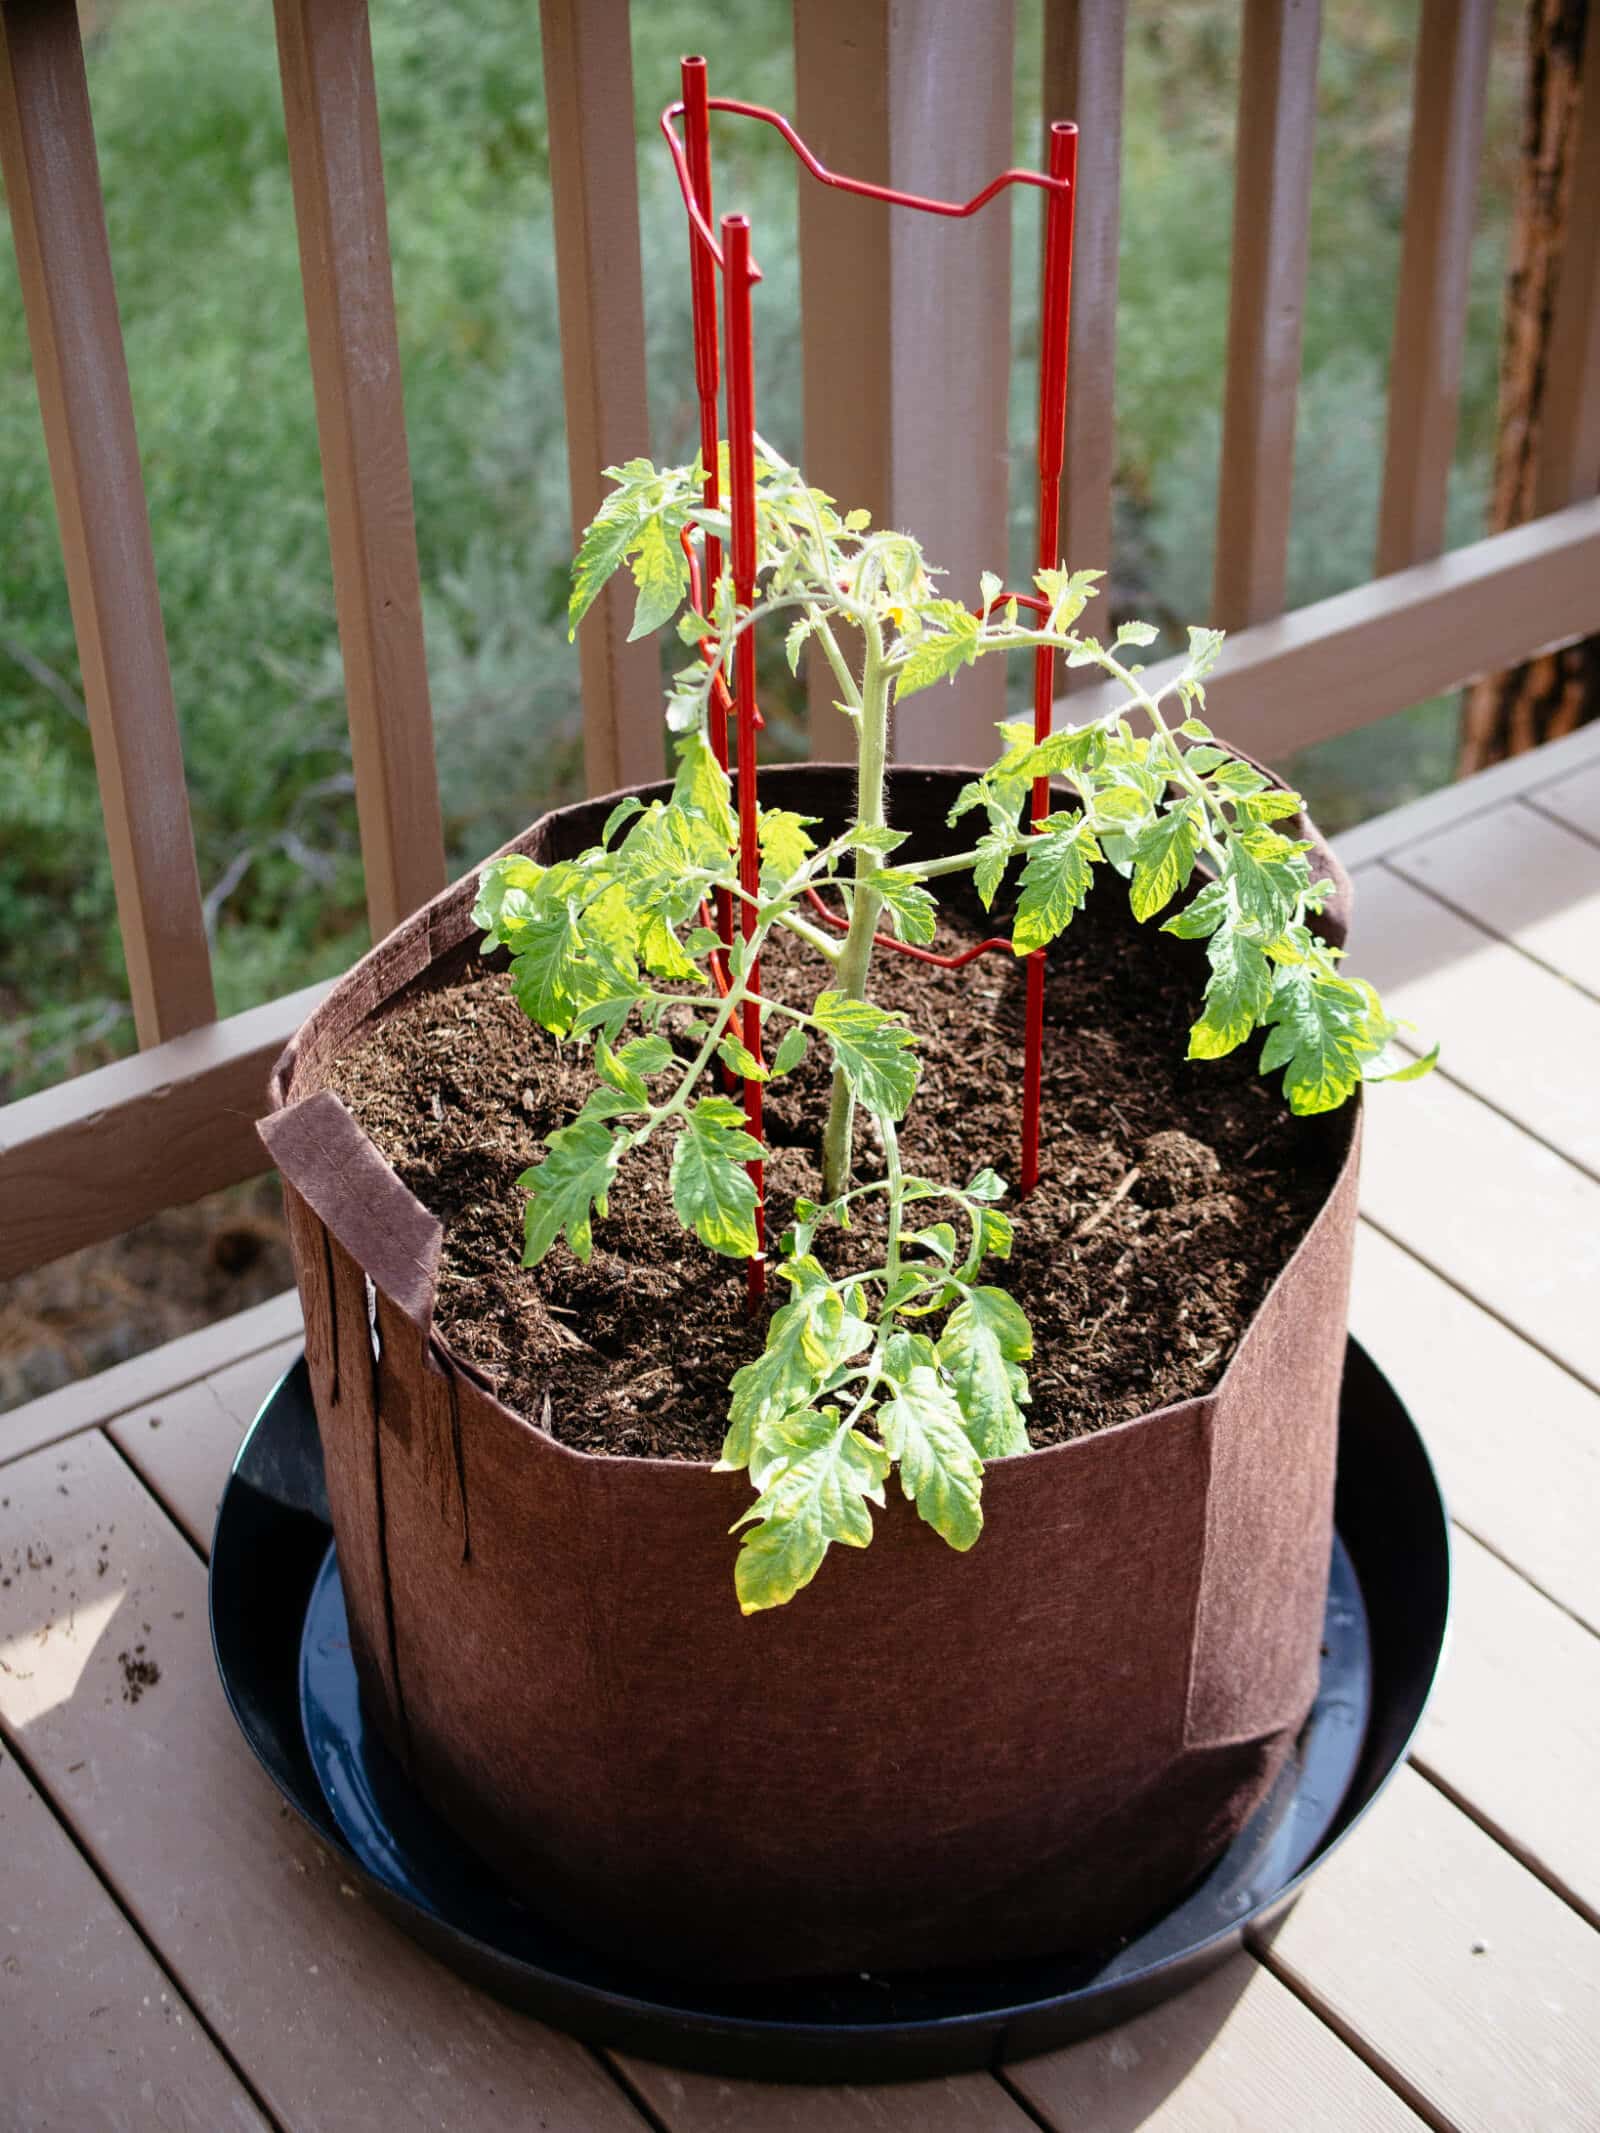 Use sturdy tomato ladders or cages to support tomato plants